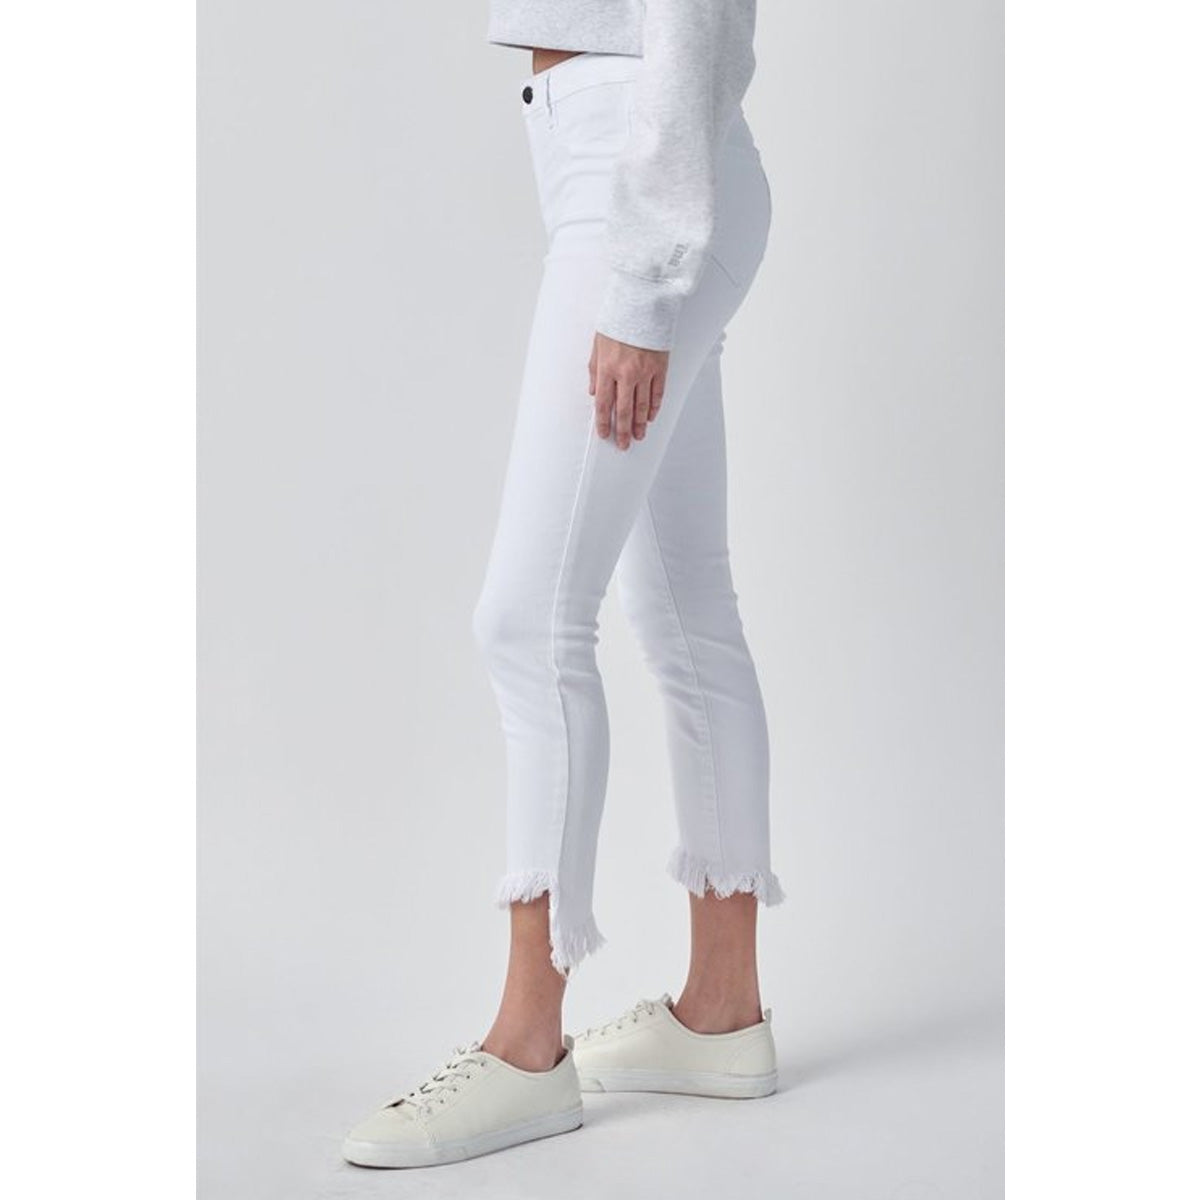 Mid Rise Crop Skinny Jeans with Frey Hem - White - Southern Grace Creations